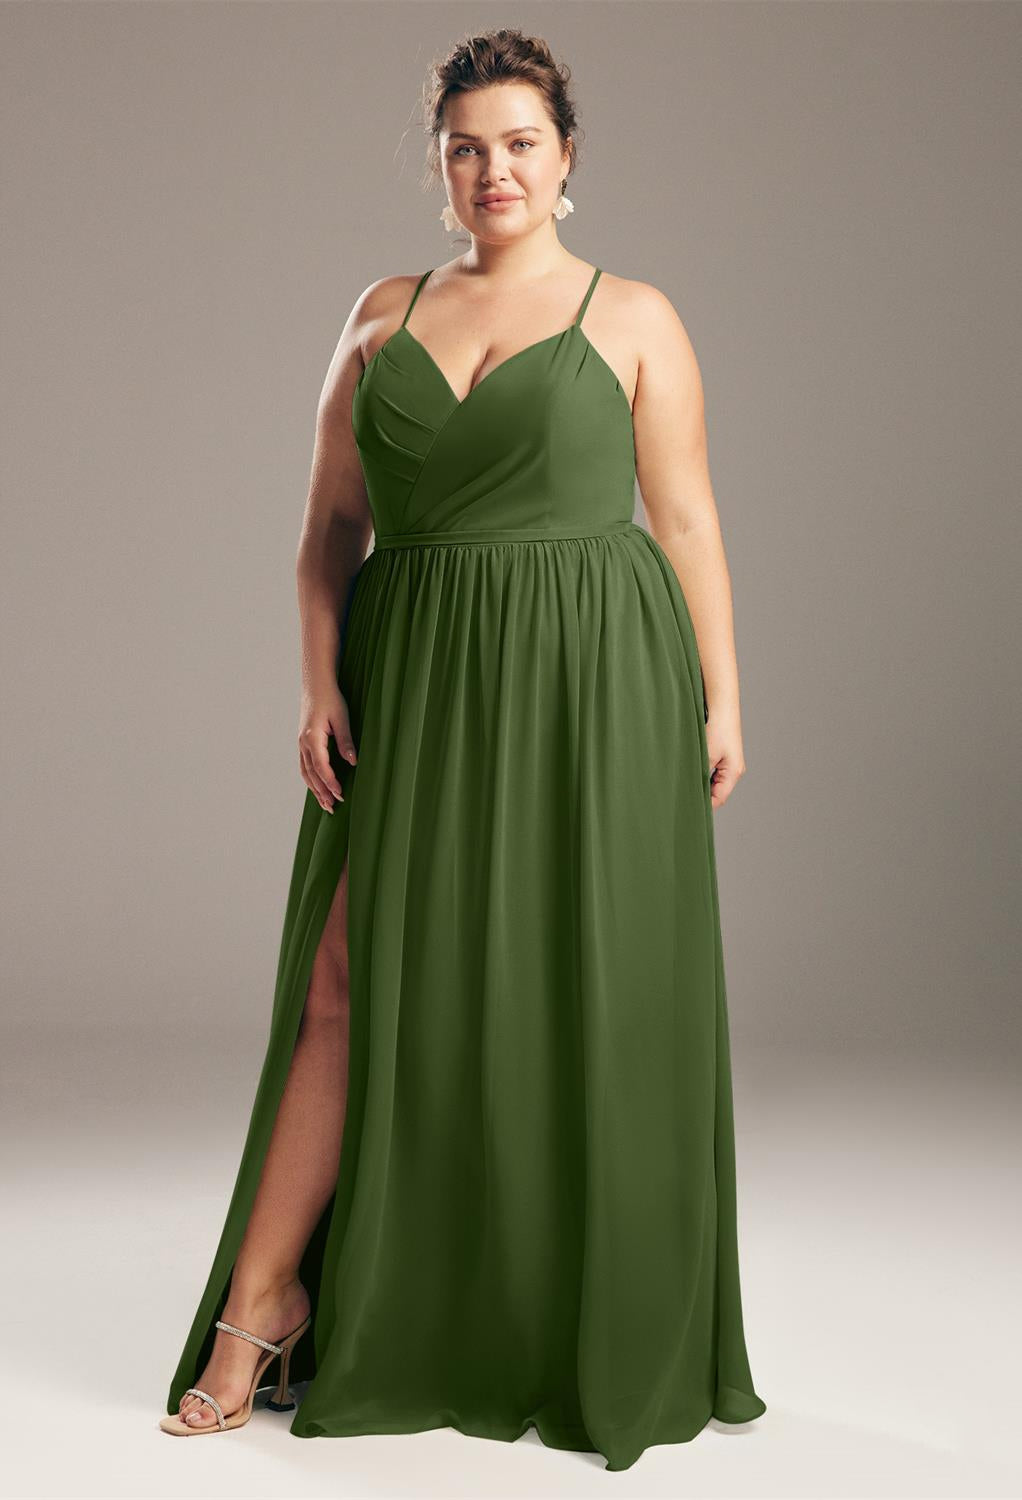 Woman in an elegant bridal gown posing with one hand on her hip, looking confident against a neutral background. 
Product Name: Bergamot Bridal - Wilfreda Chiffon Bridesmaid Dress - Off The Rack